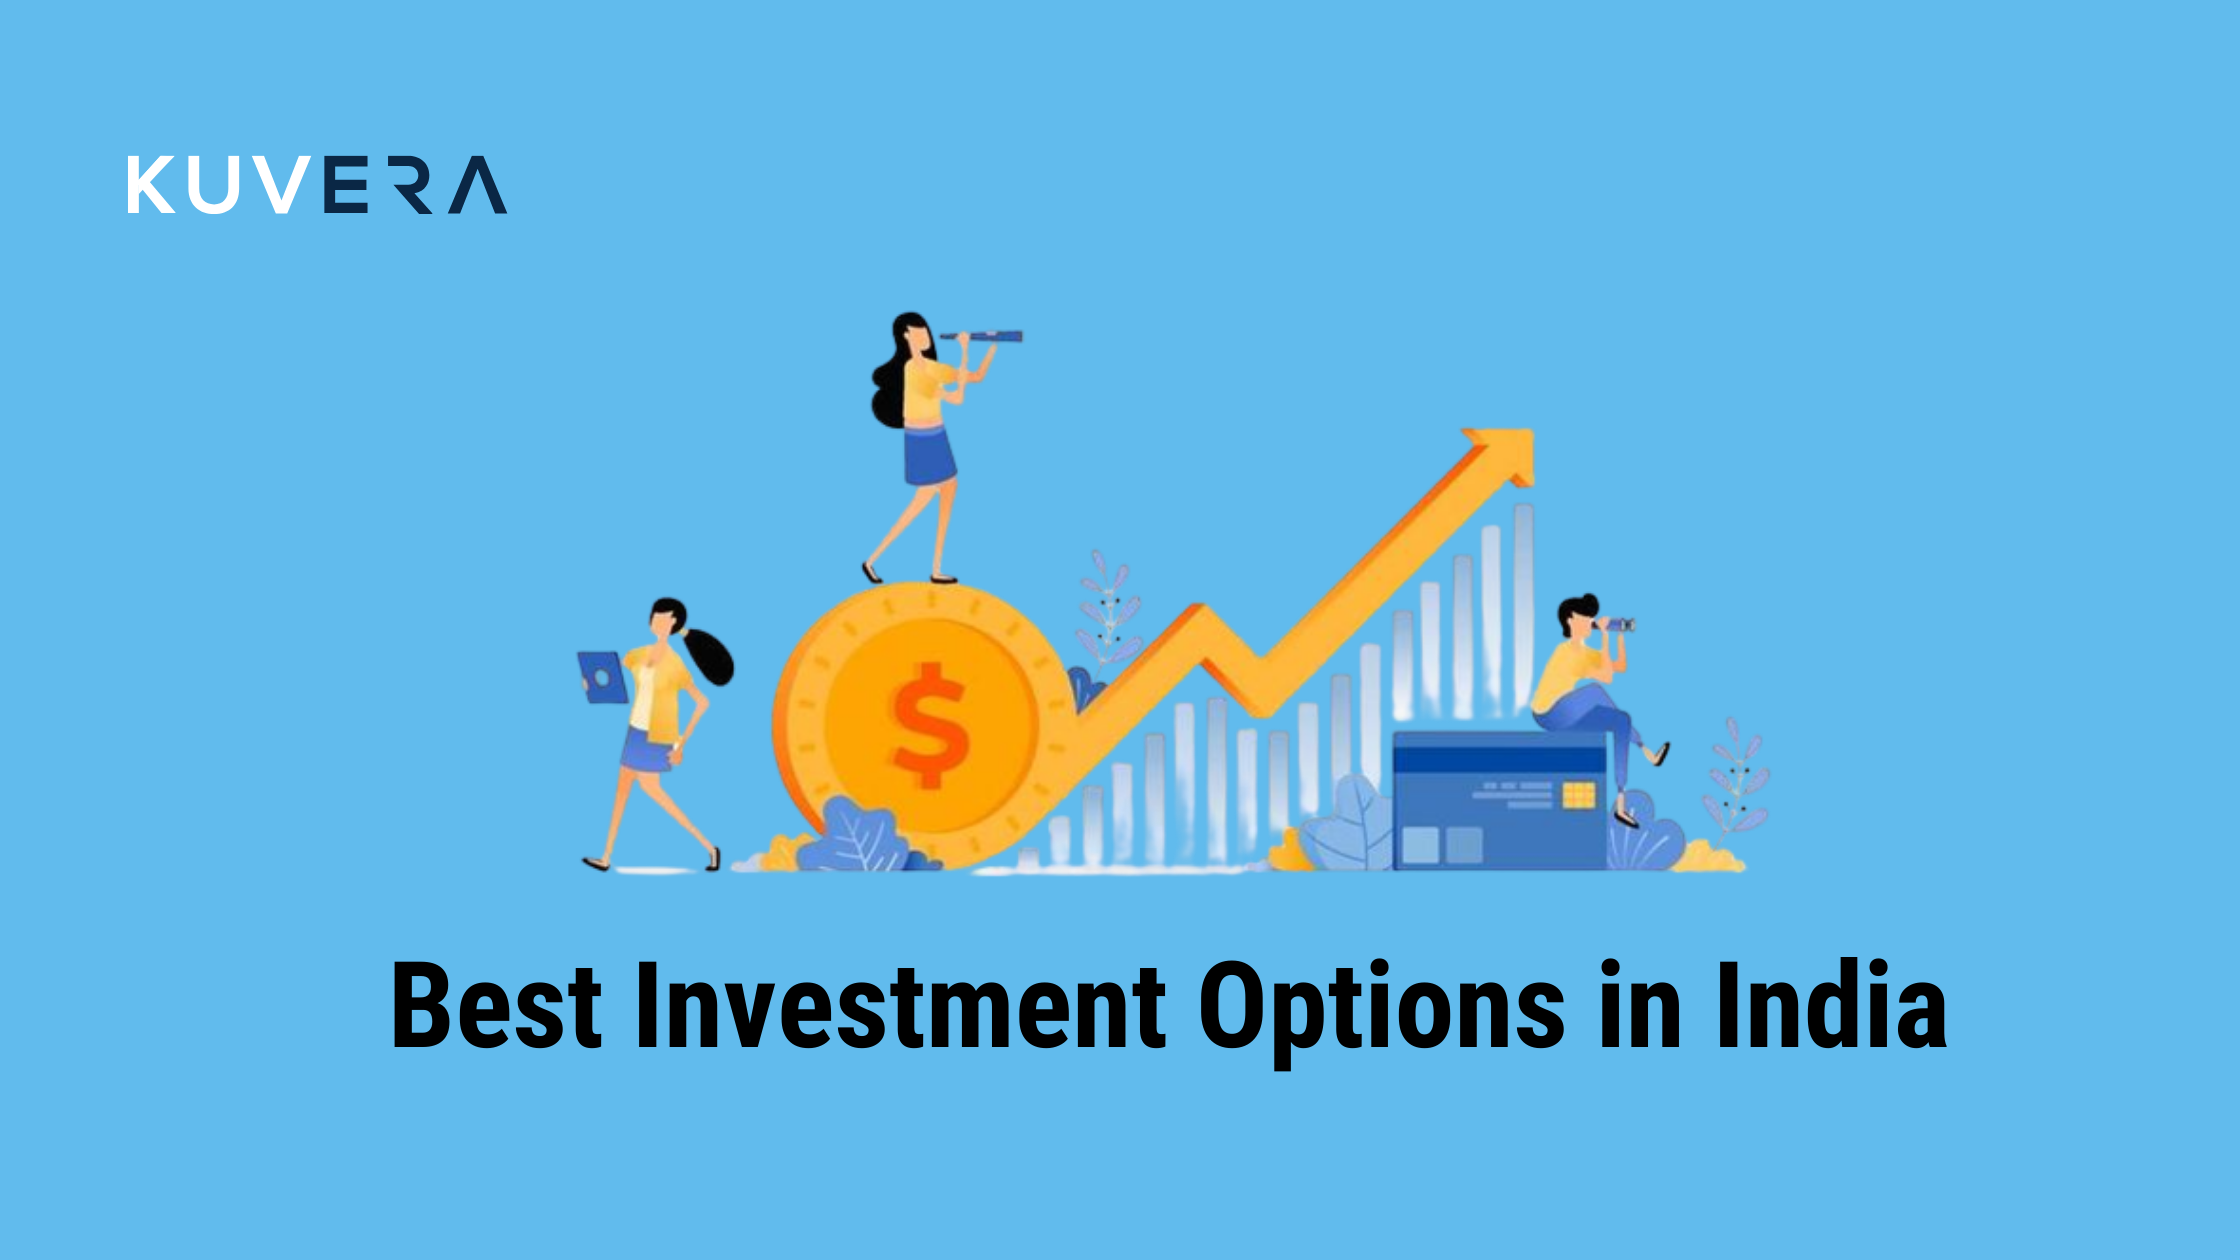 Top 10 Best Investment Options in India Kuvera